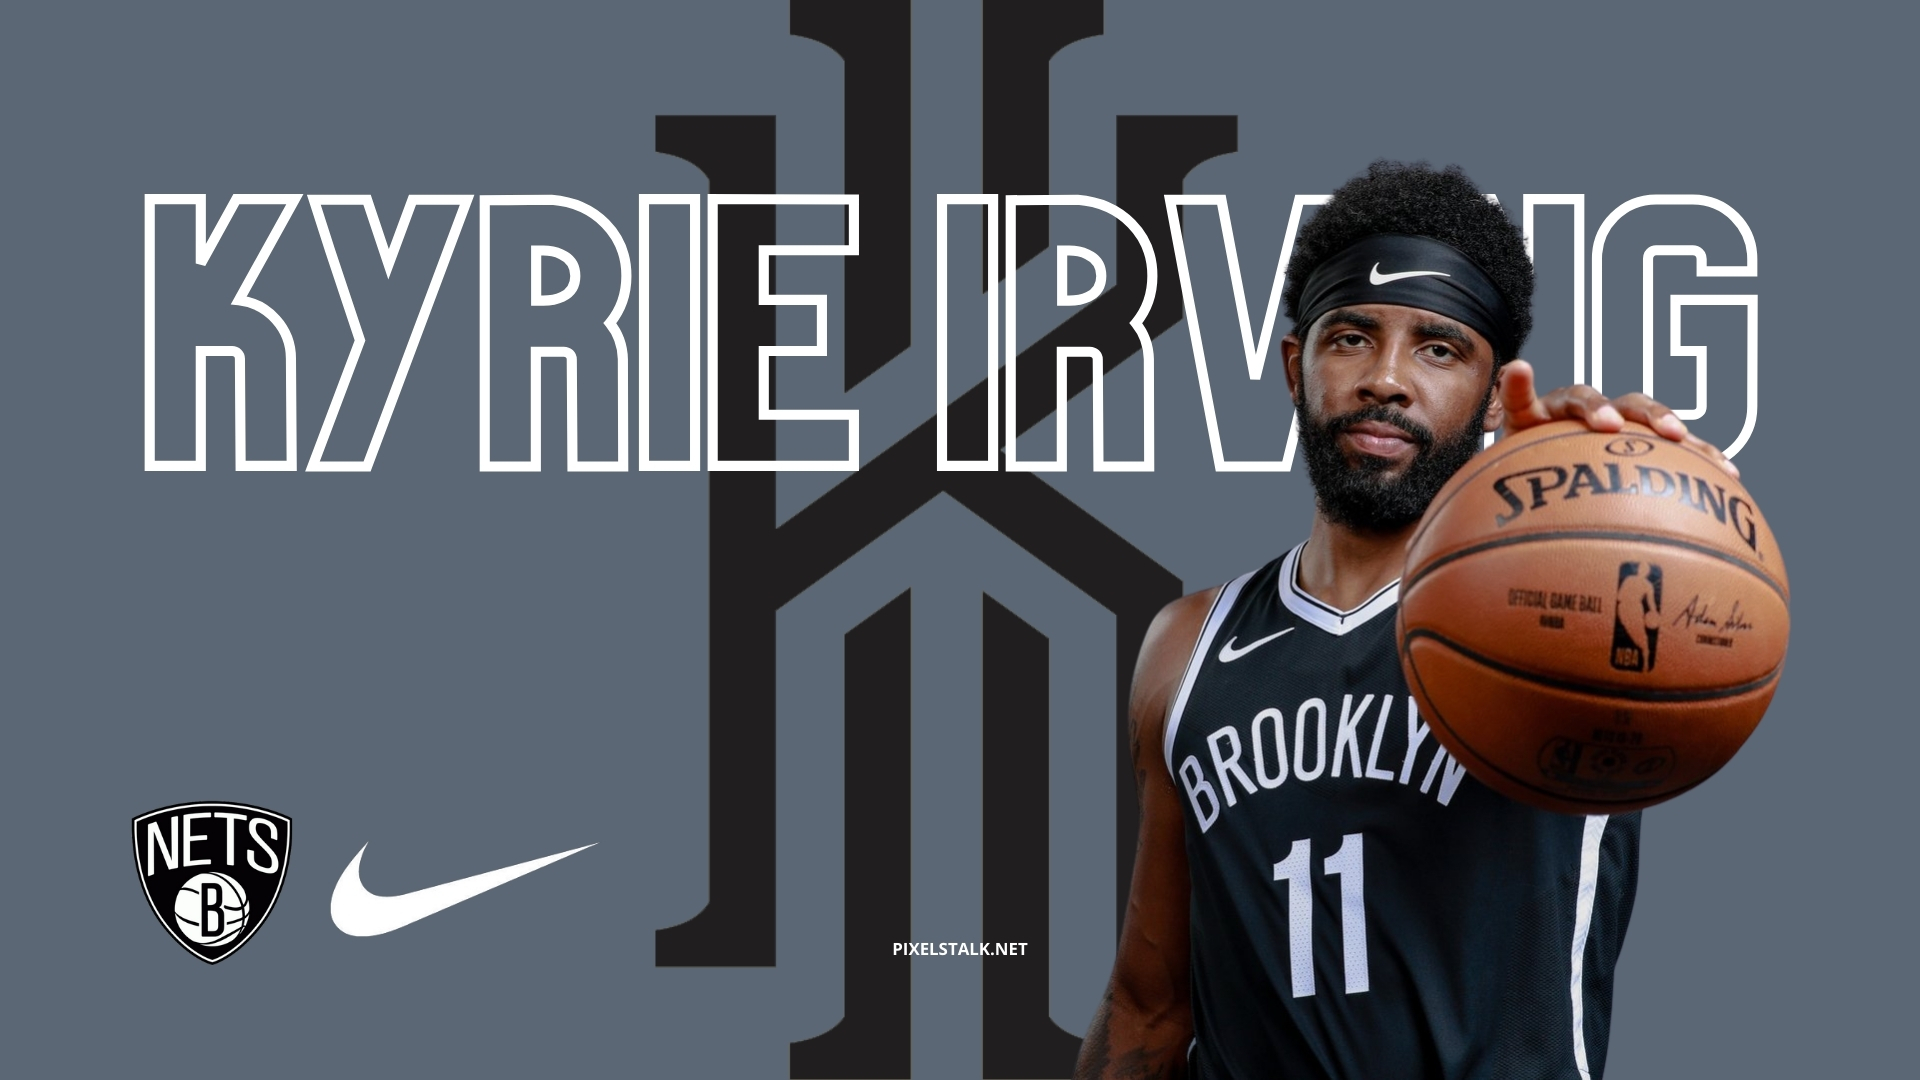 kyrie irving basketball nba Wallpaper HD Sports 4K Wallpapers Images  and Background  Wallpapers Den